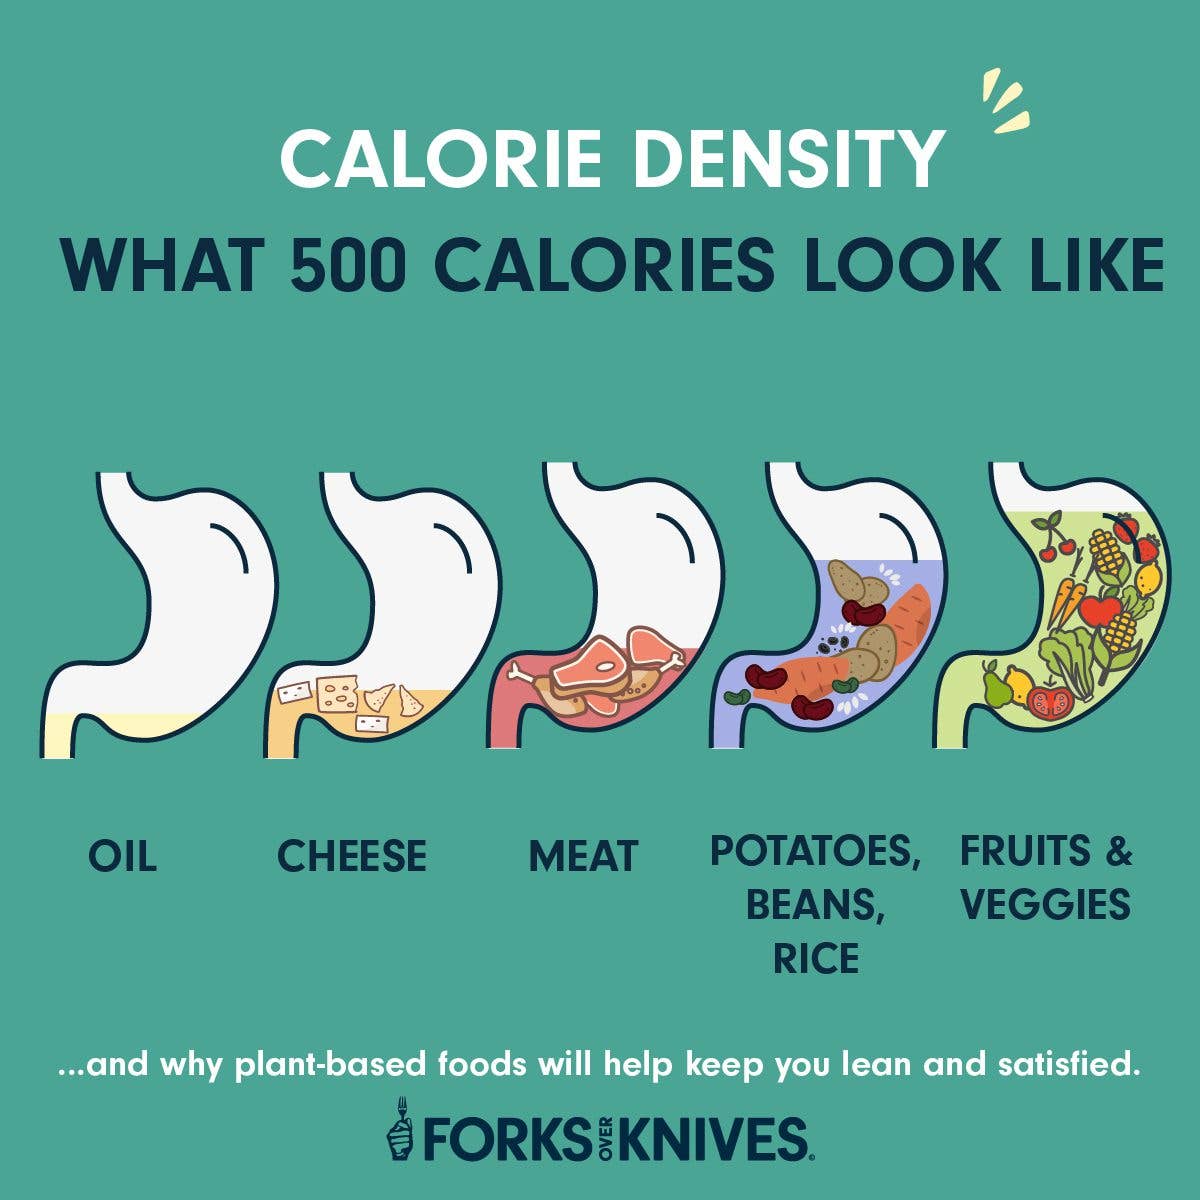 calorie density chart - what 500 calories looks like